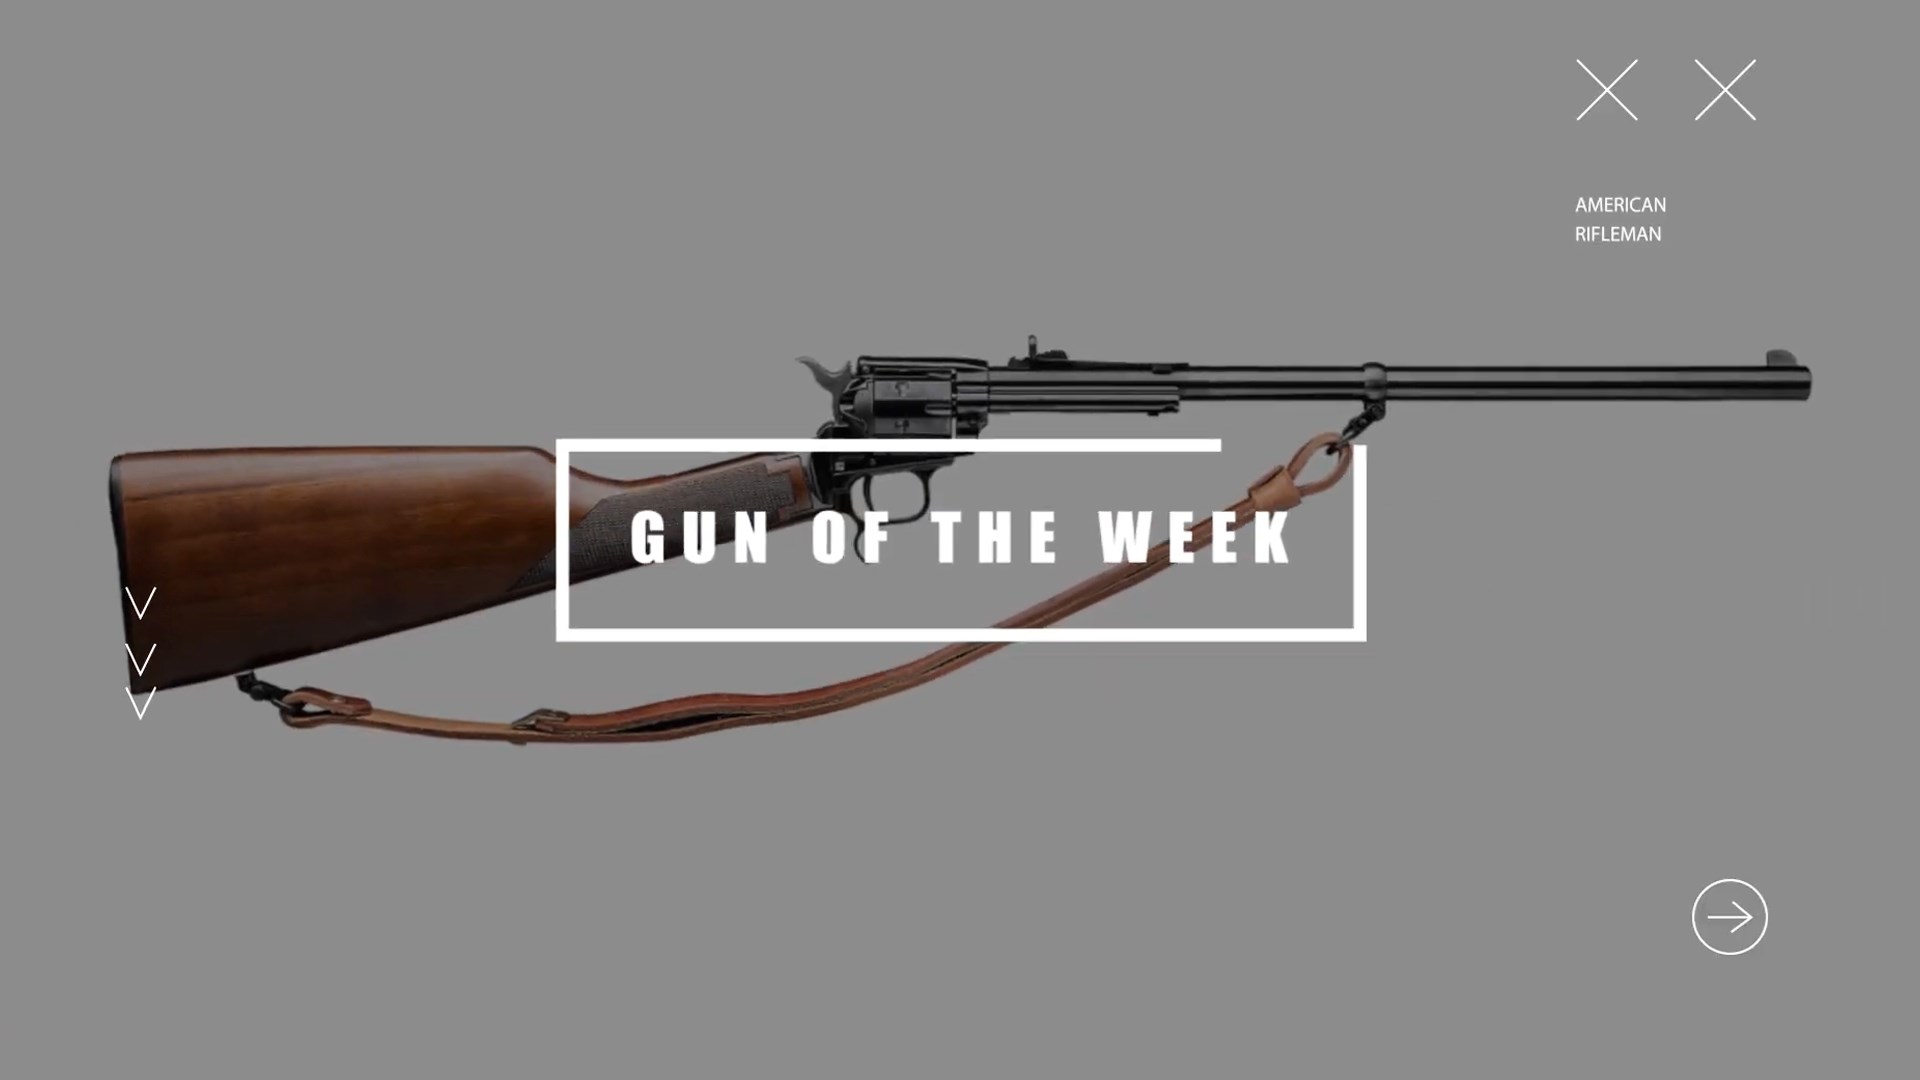 Heritage MFG Rough Rider Rancher Carbine right-side view GOTW OF THE WEEK text box overlay AMERICAN RIFLEMAN XX ARROWS